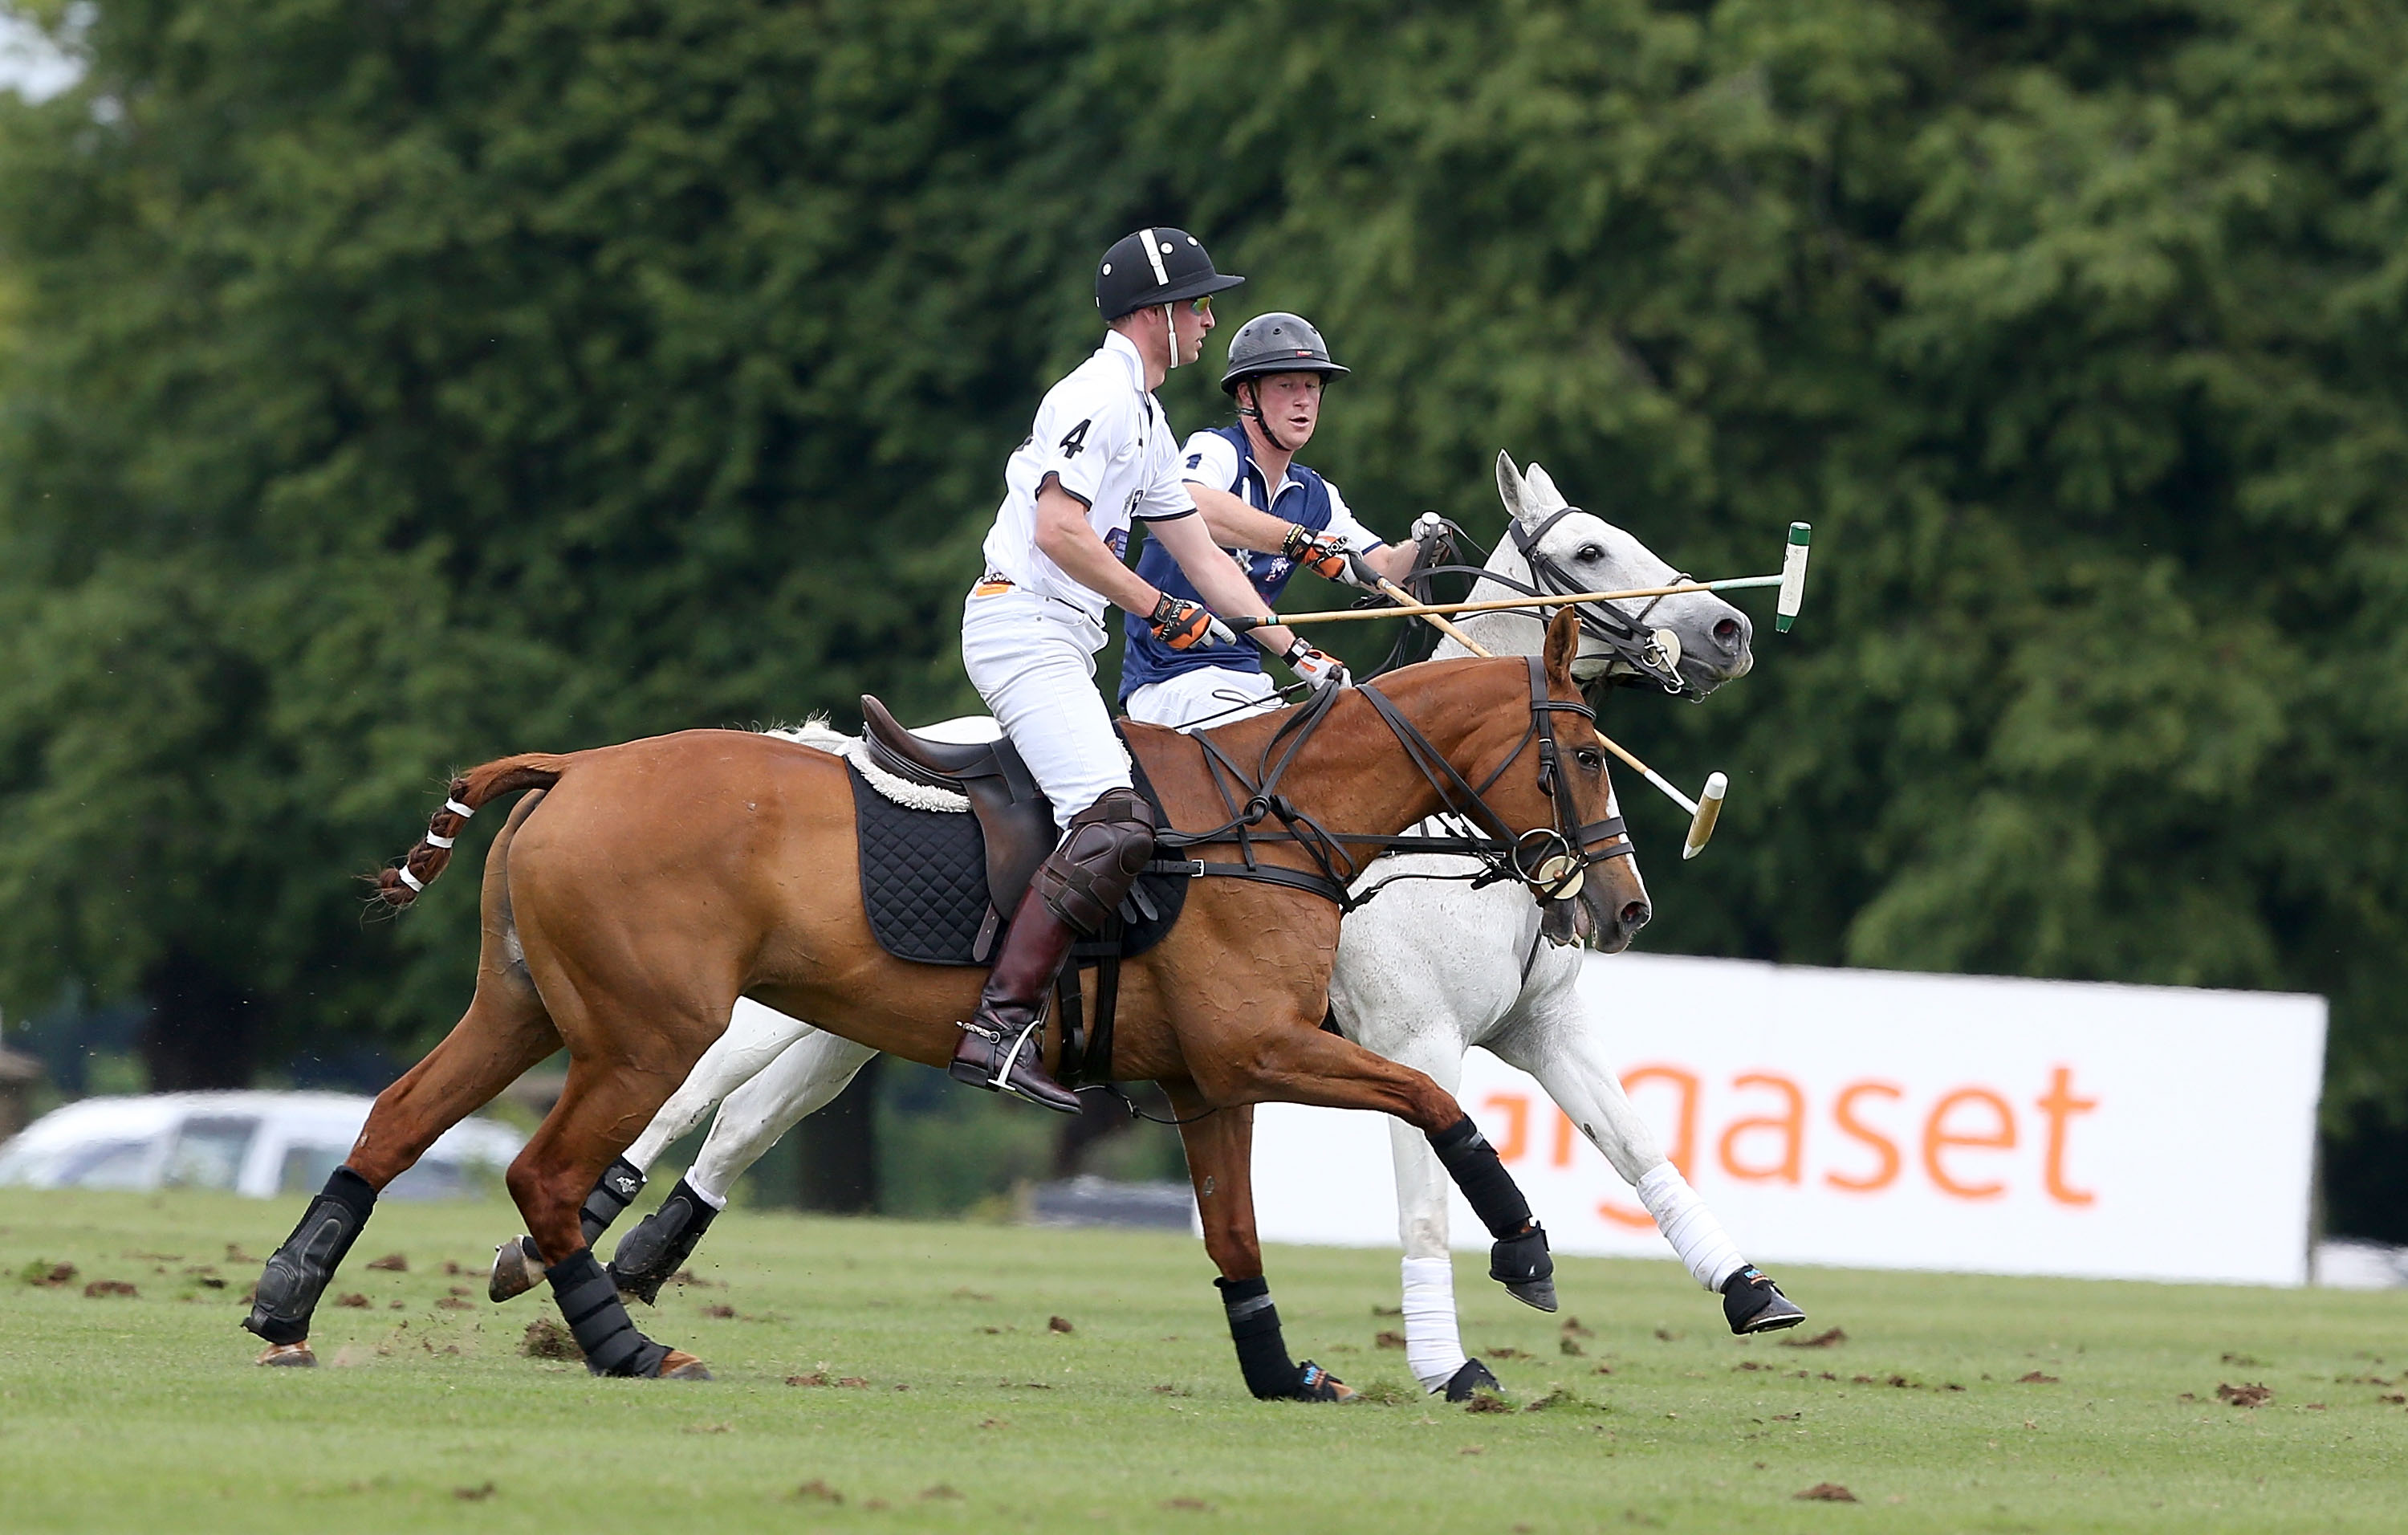 TETBURY, ENGLAND - JUNE 14: Prince Harry plays for team Royal Salute and Prince William, Duke of Cambridge plays for team Piaget at the Gigaset Charity Polo Match at Beaufort Polo Club on June 14, 2015 in Tetbury, England. (Photo by Chris Jackson/Getty Images for Gigaset Mobile) *** Local Caption *** Prince Harry; Prince William; Duke of Cambridge